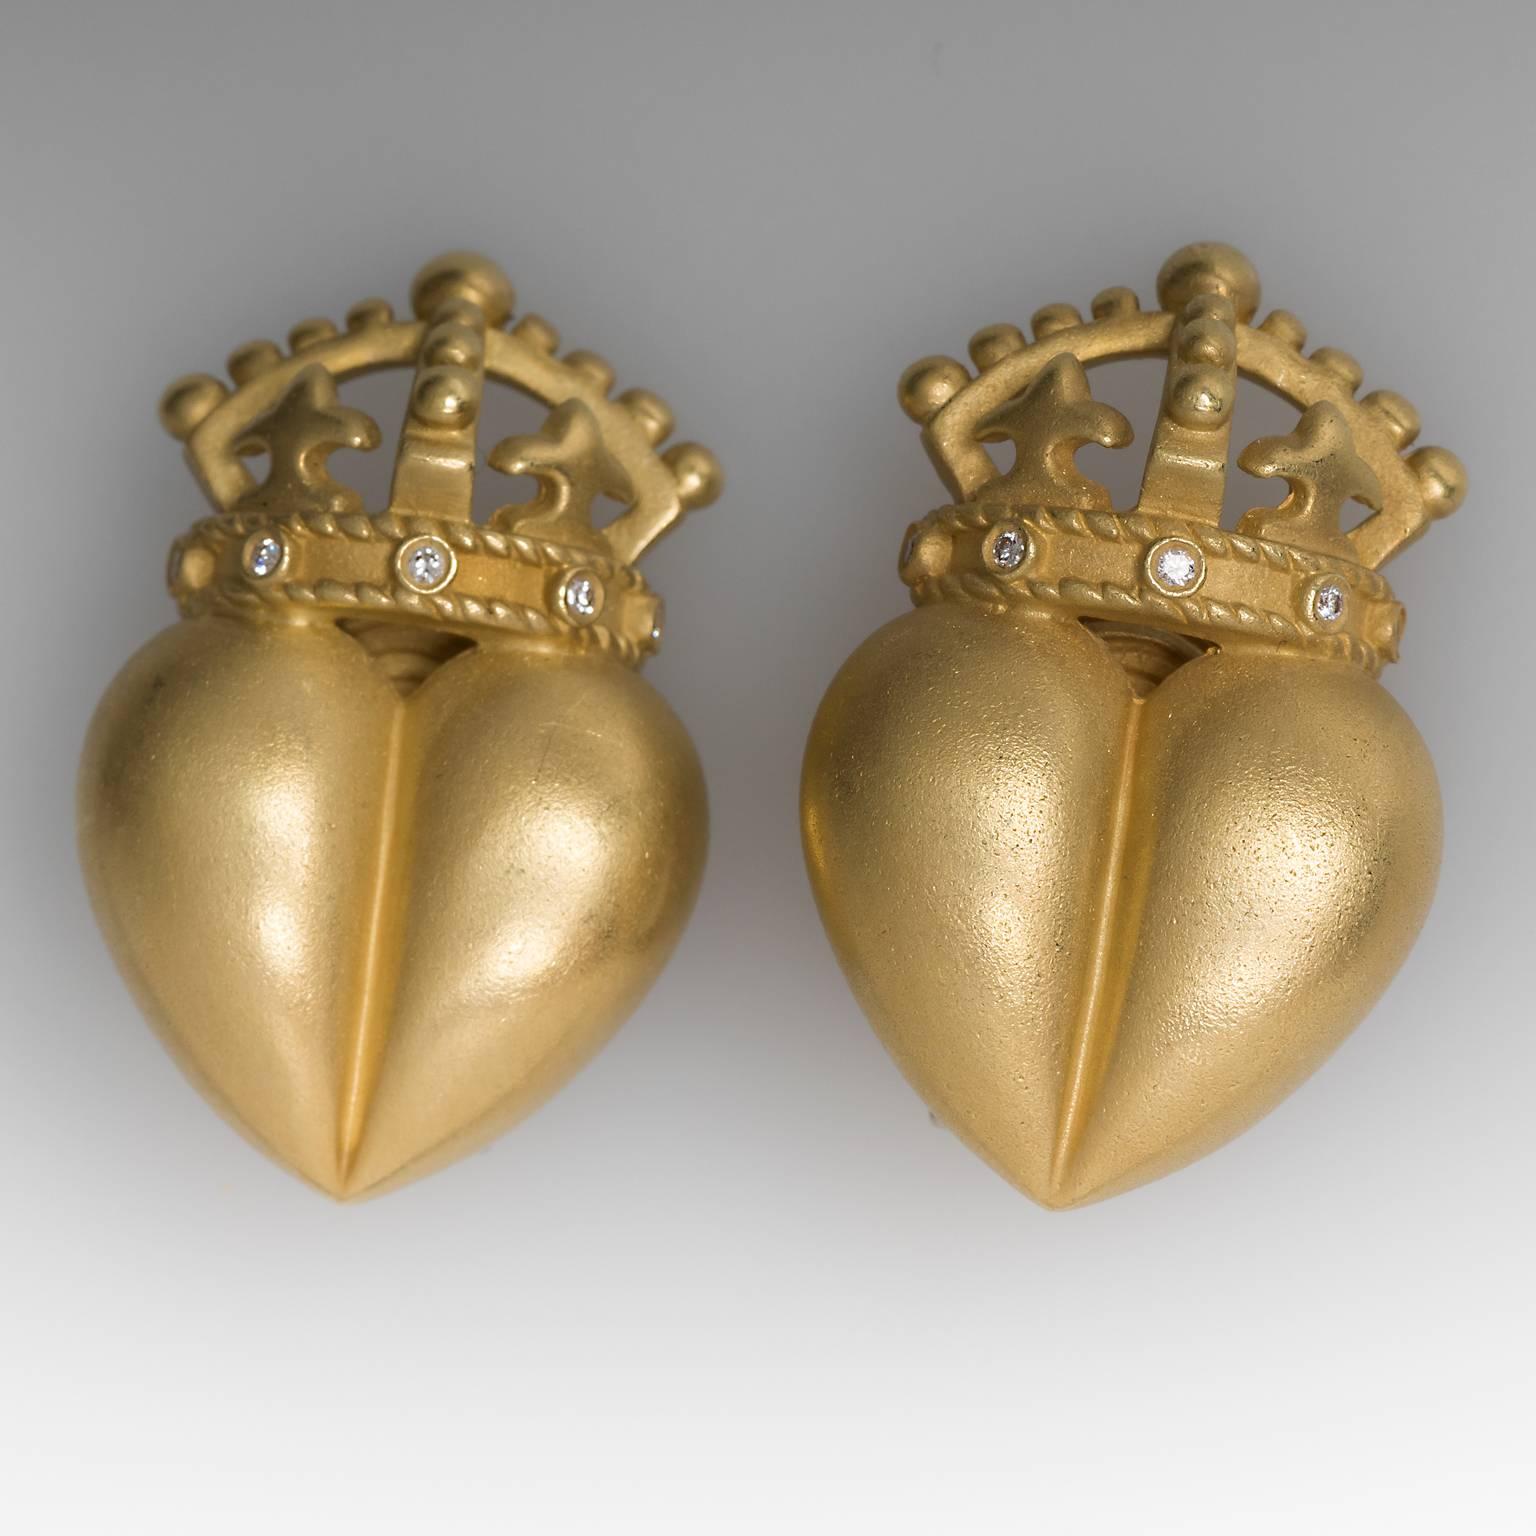 These striking Barry Kieselstein Cord crown heart earrings are crafted of solid 18k gold. They feature genuine diamond accents and are in like new condition. The earrings are currently clip on but can have a post added. The earrings are date stamped